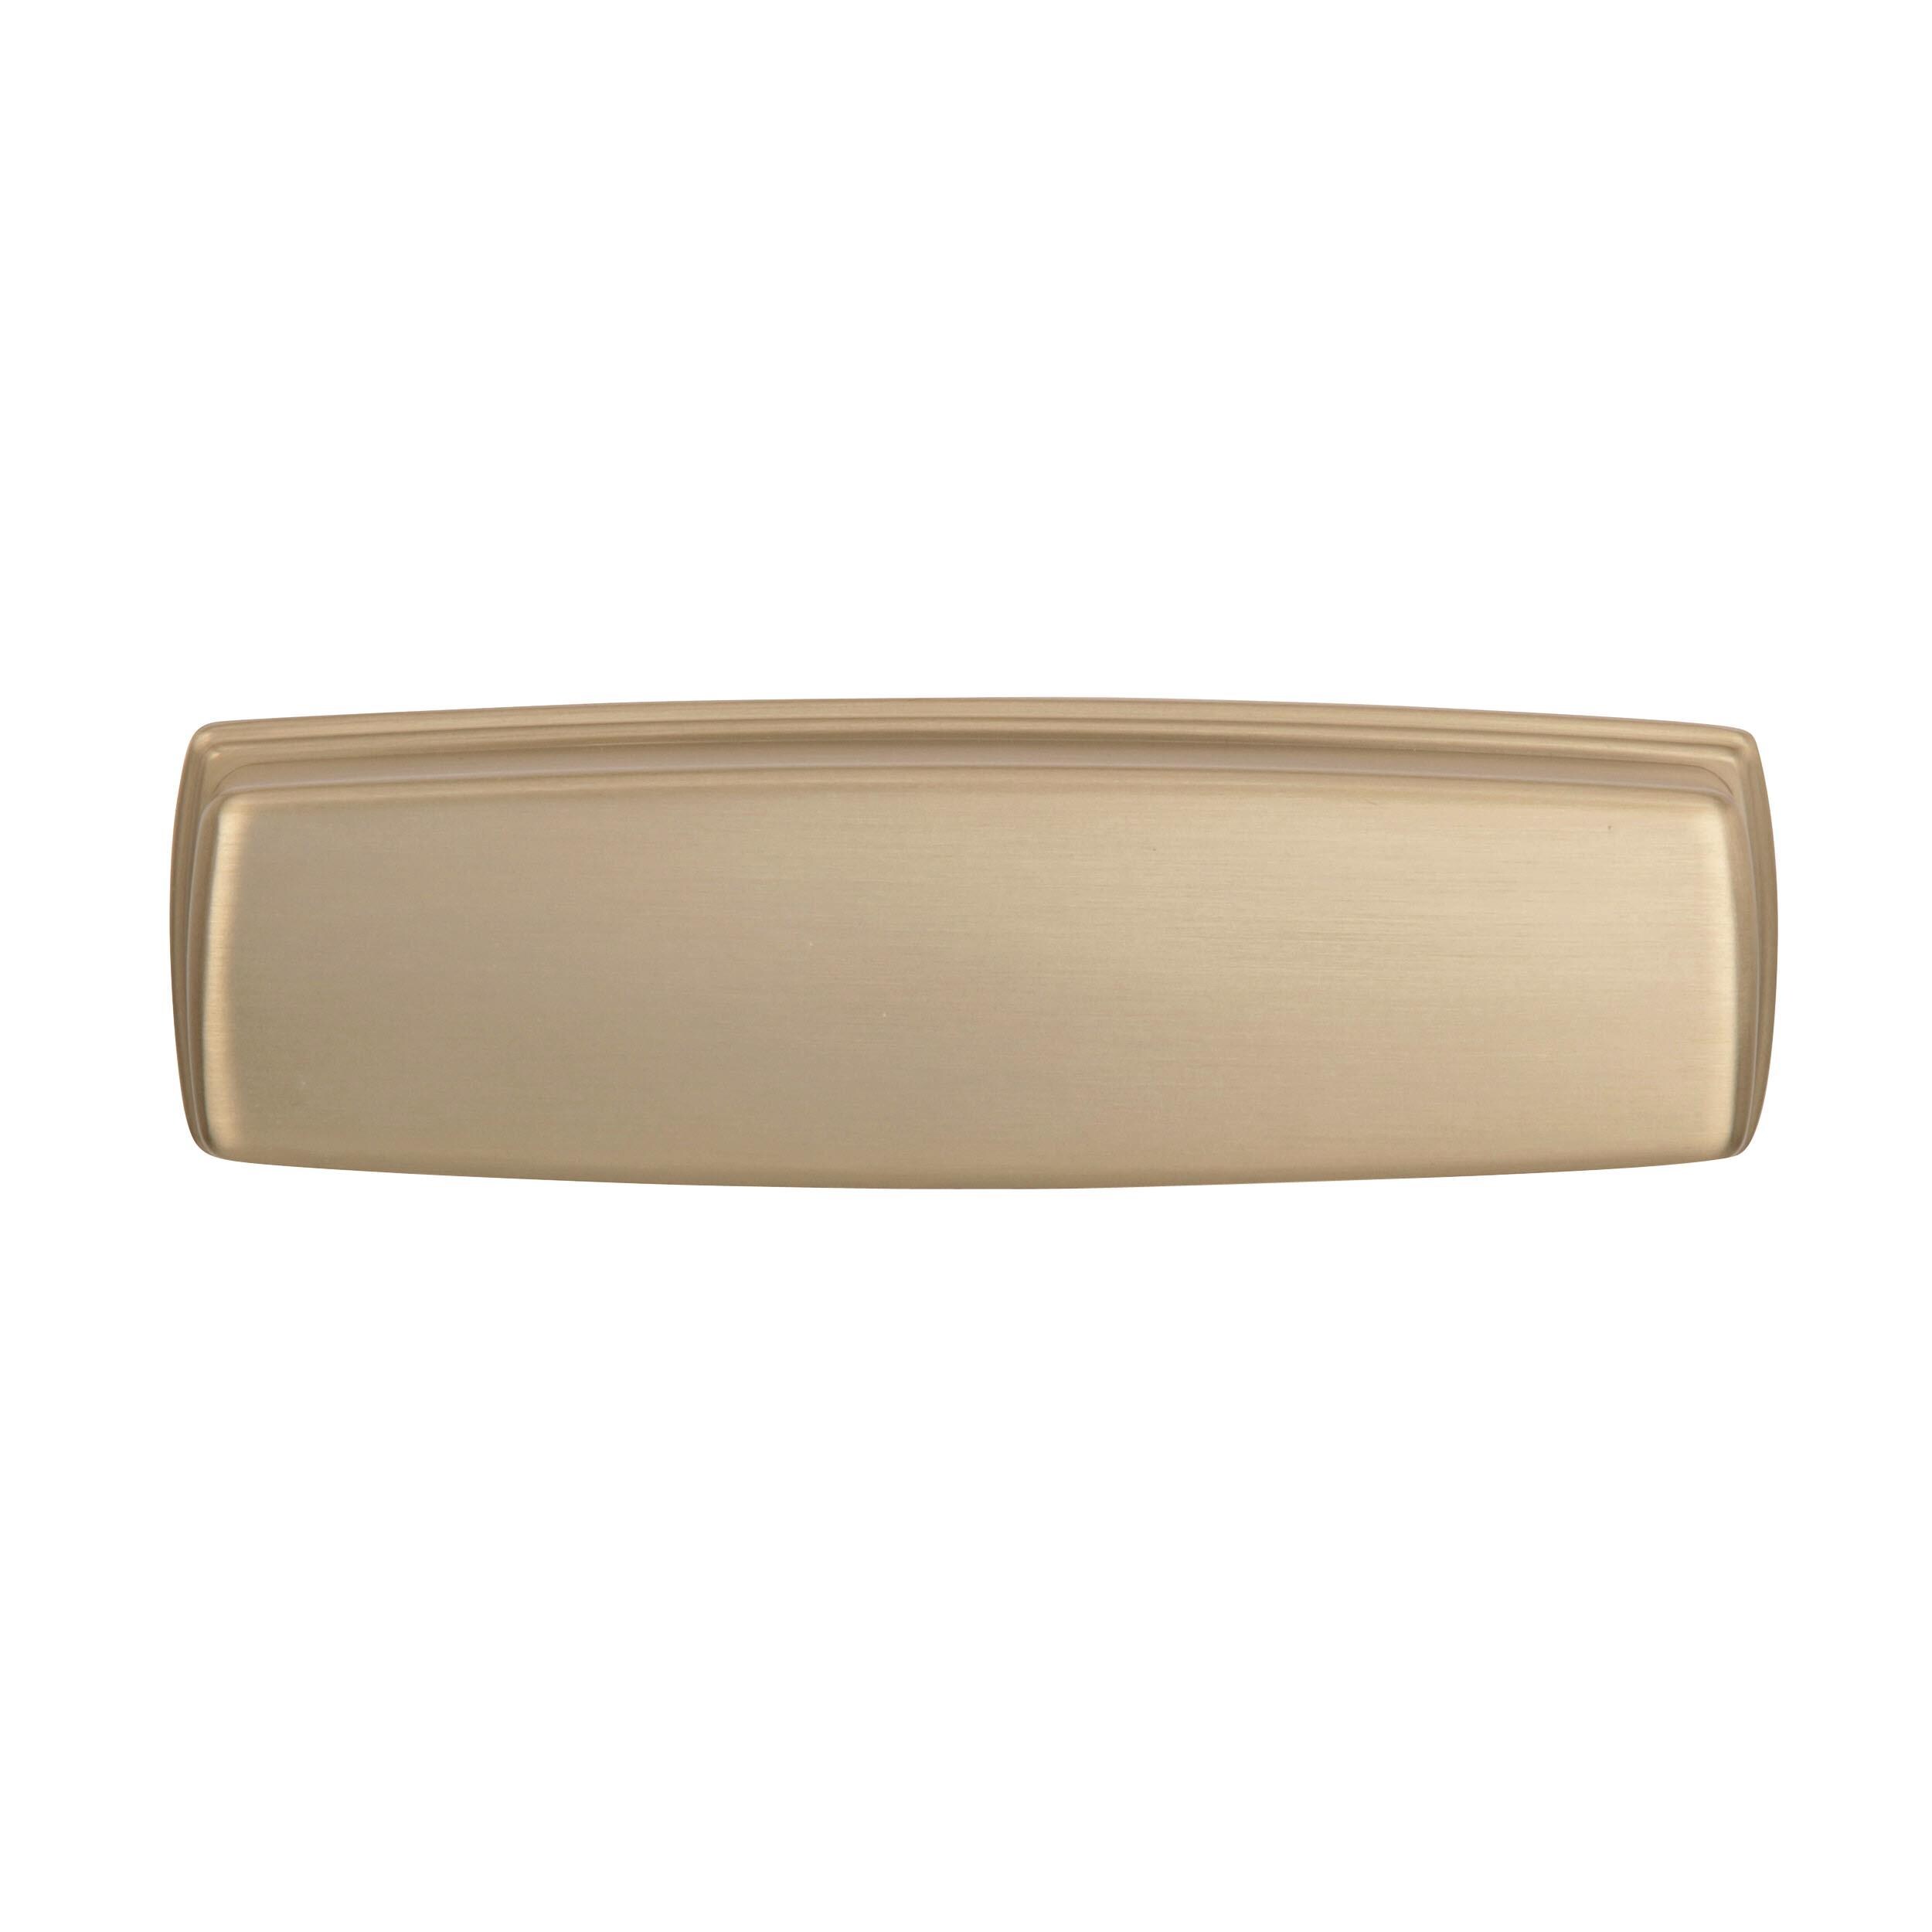 department Champagne Kane 3-3/4-in at Amerock the Golden Drawer Pulls Rectangular in to Pulls Center Drawer Cup Center